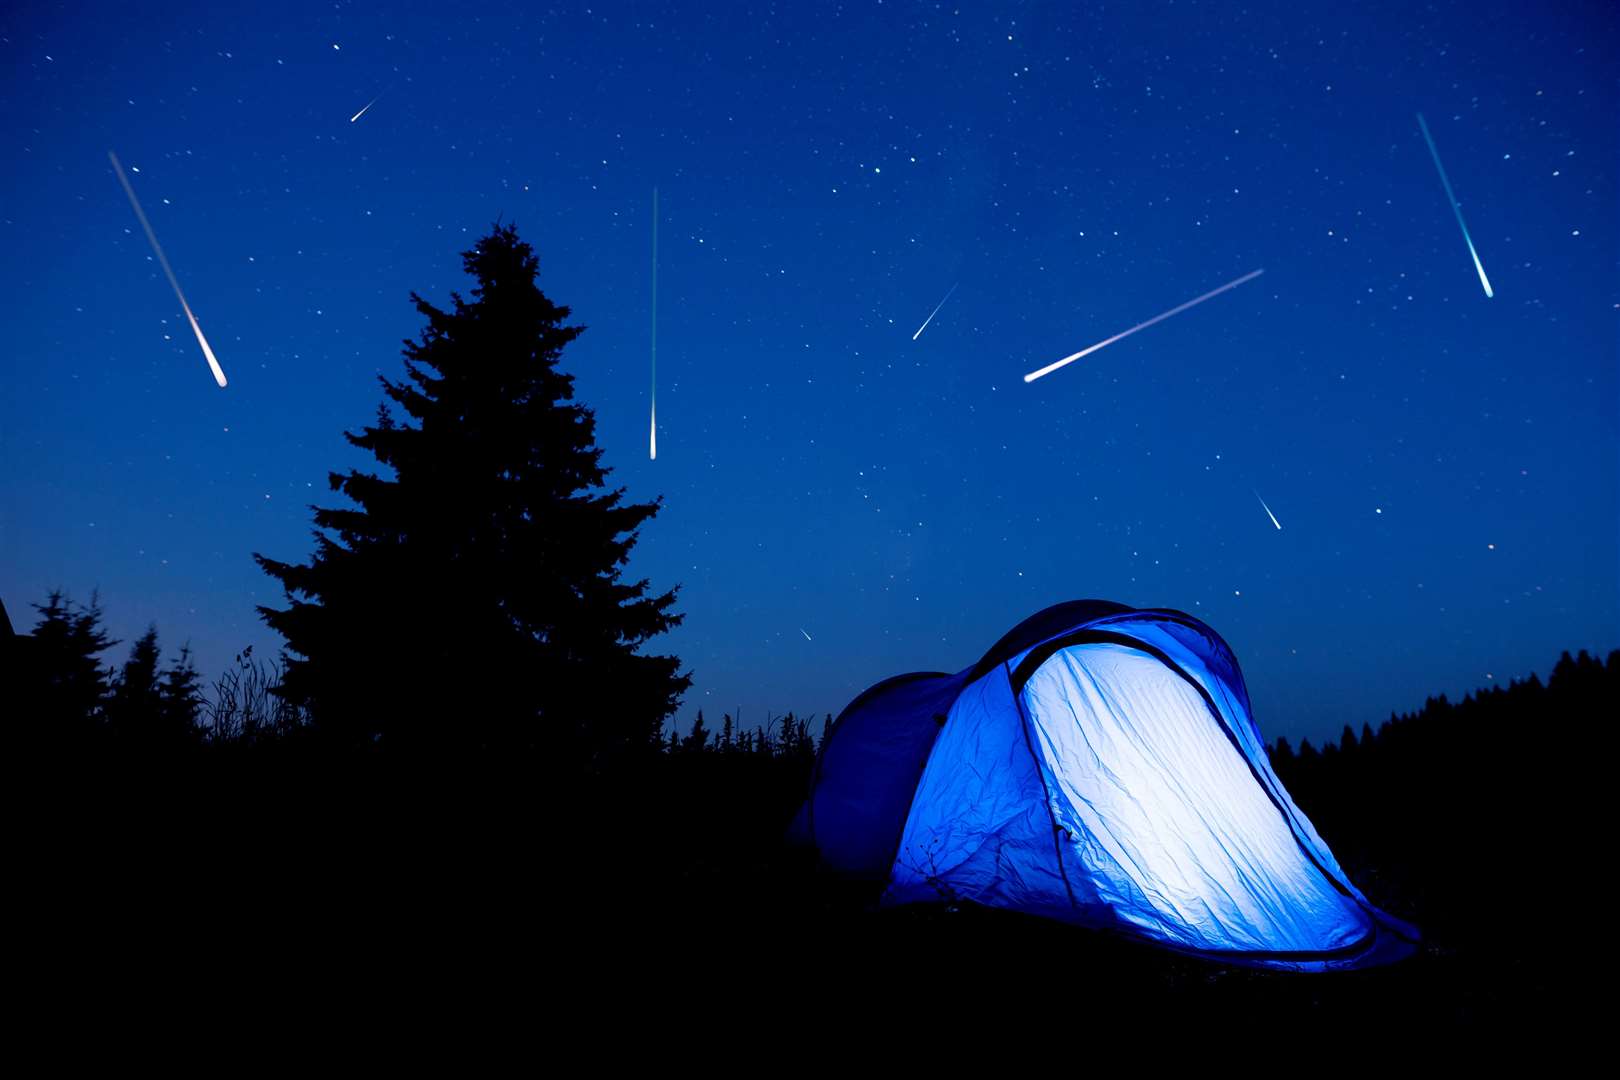 The Perseid shower is said to be the best meteor shower of the year. iStock image.